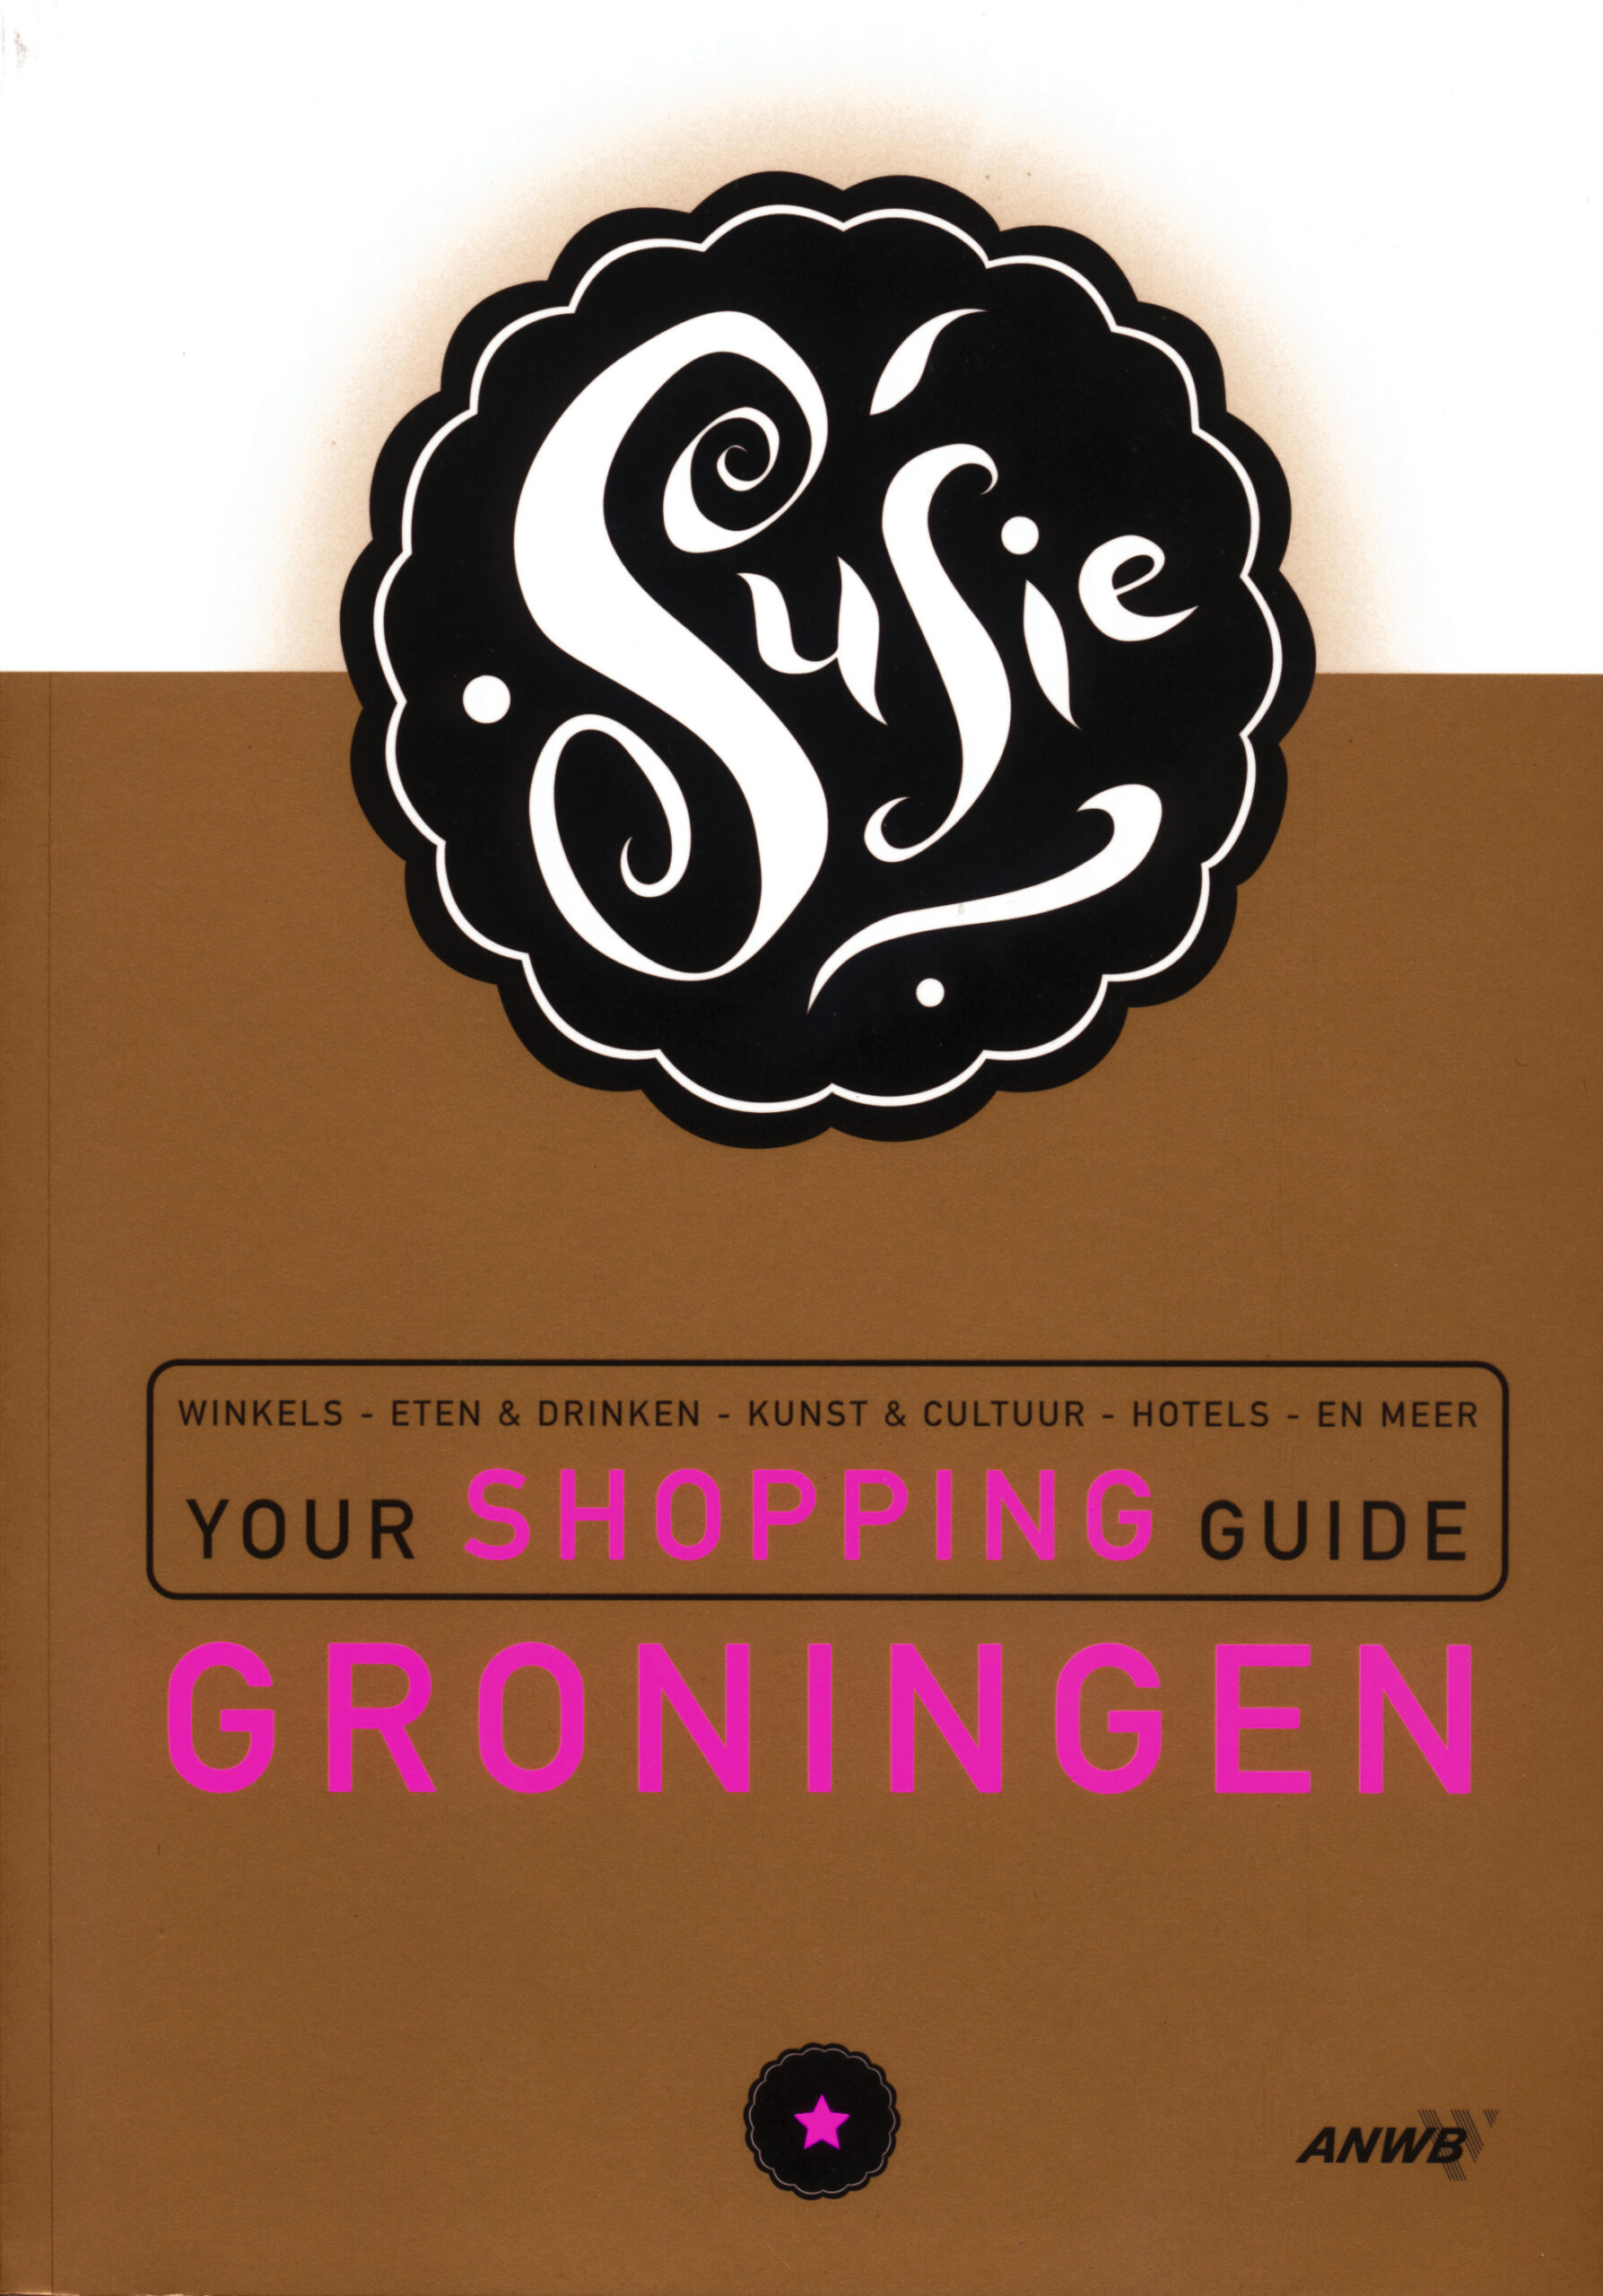 Susie shopping guide